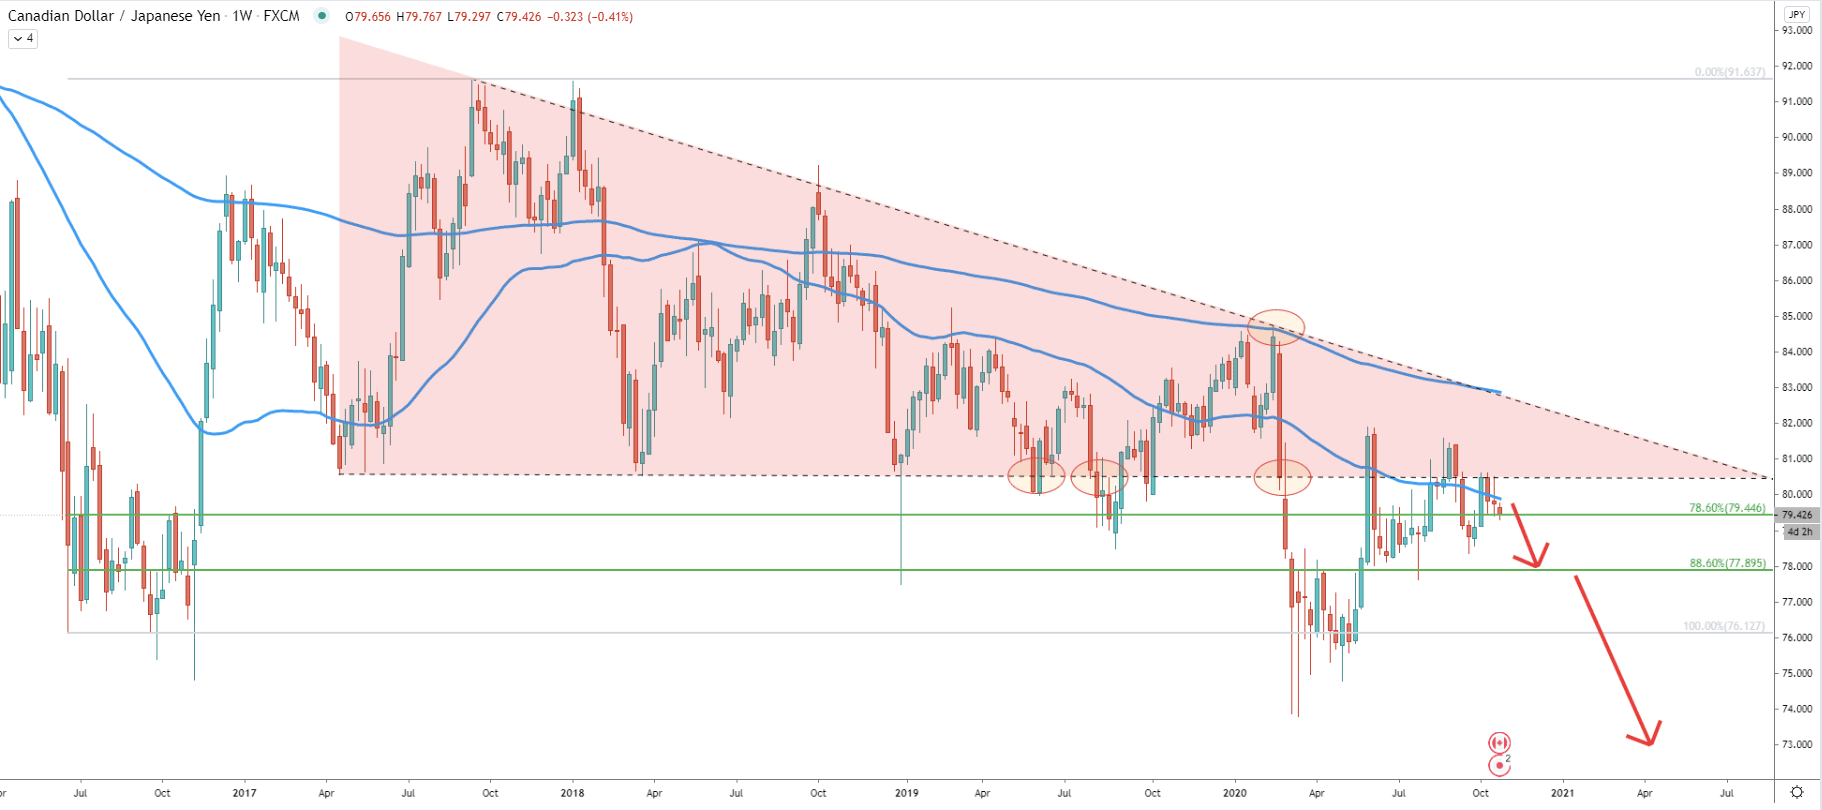 CAD/JPY Weekly Technical Analysis 26 Oct 2020